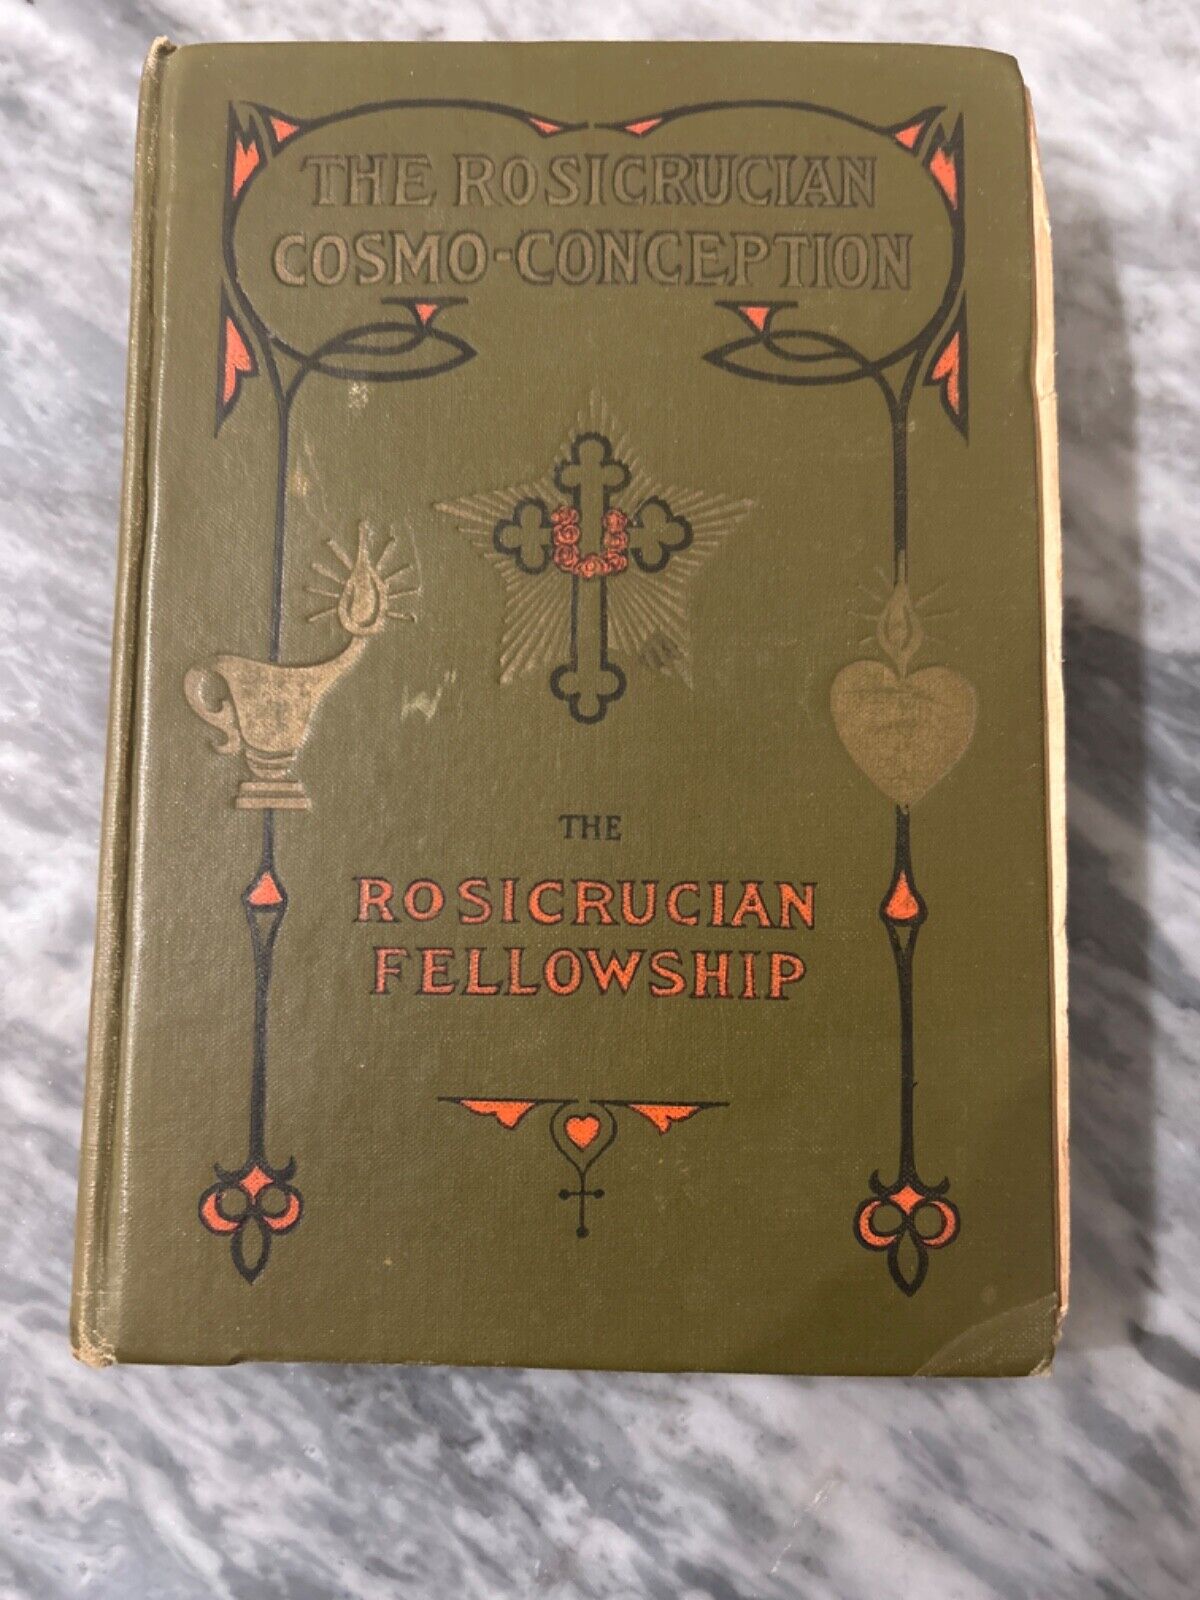 1942 The Rosicrucian Cosmo-conception